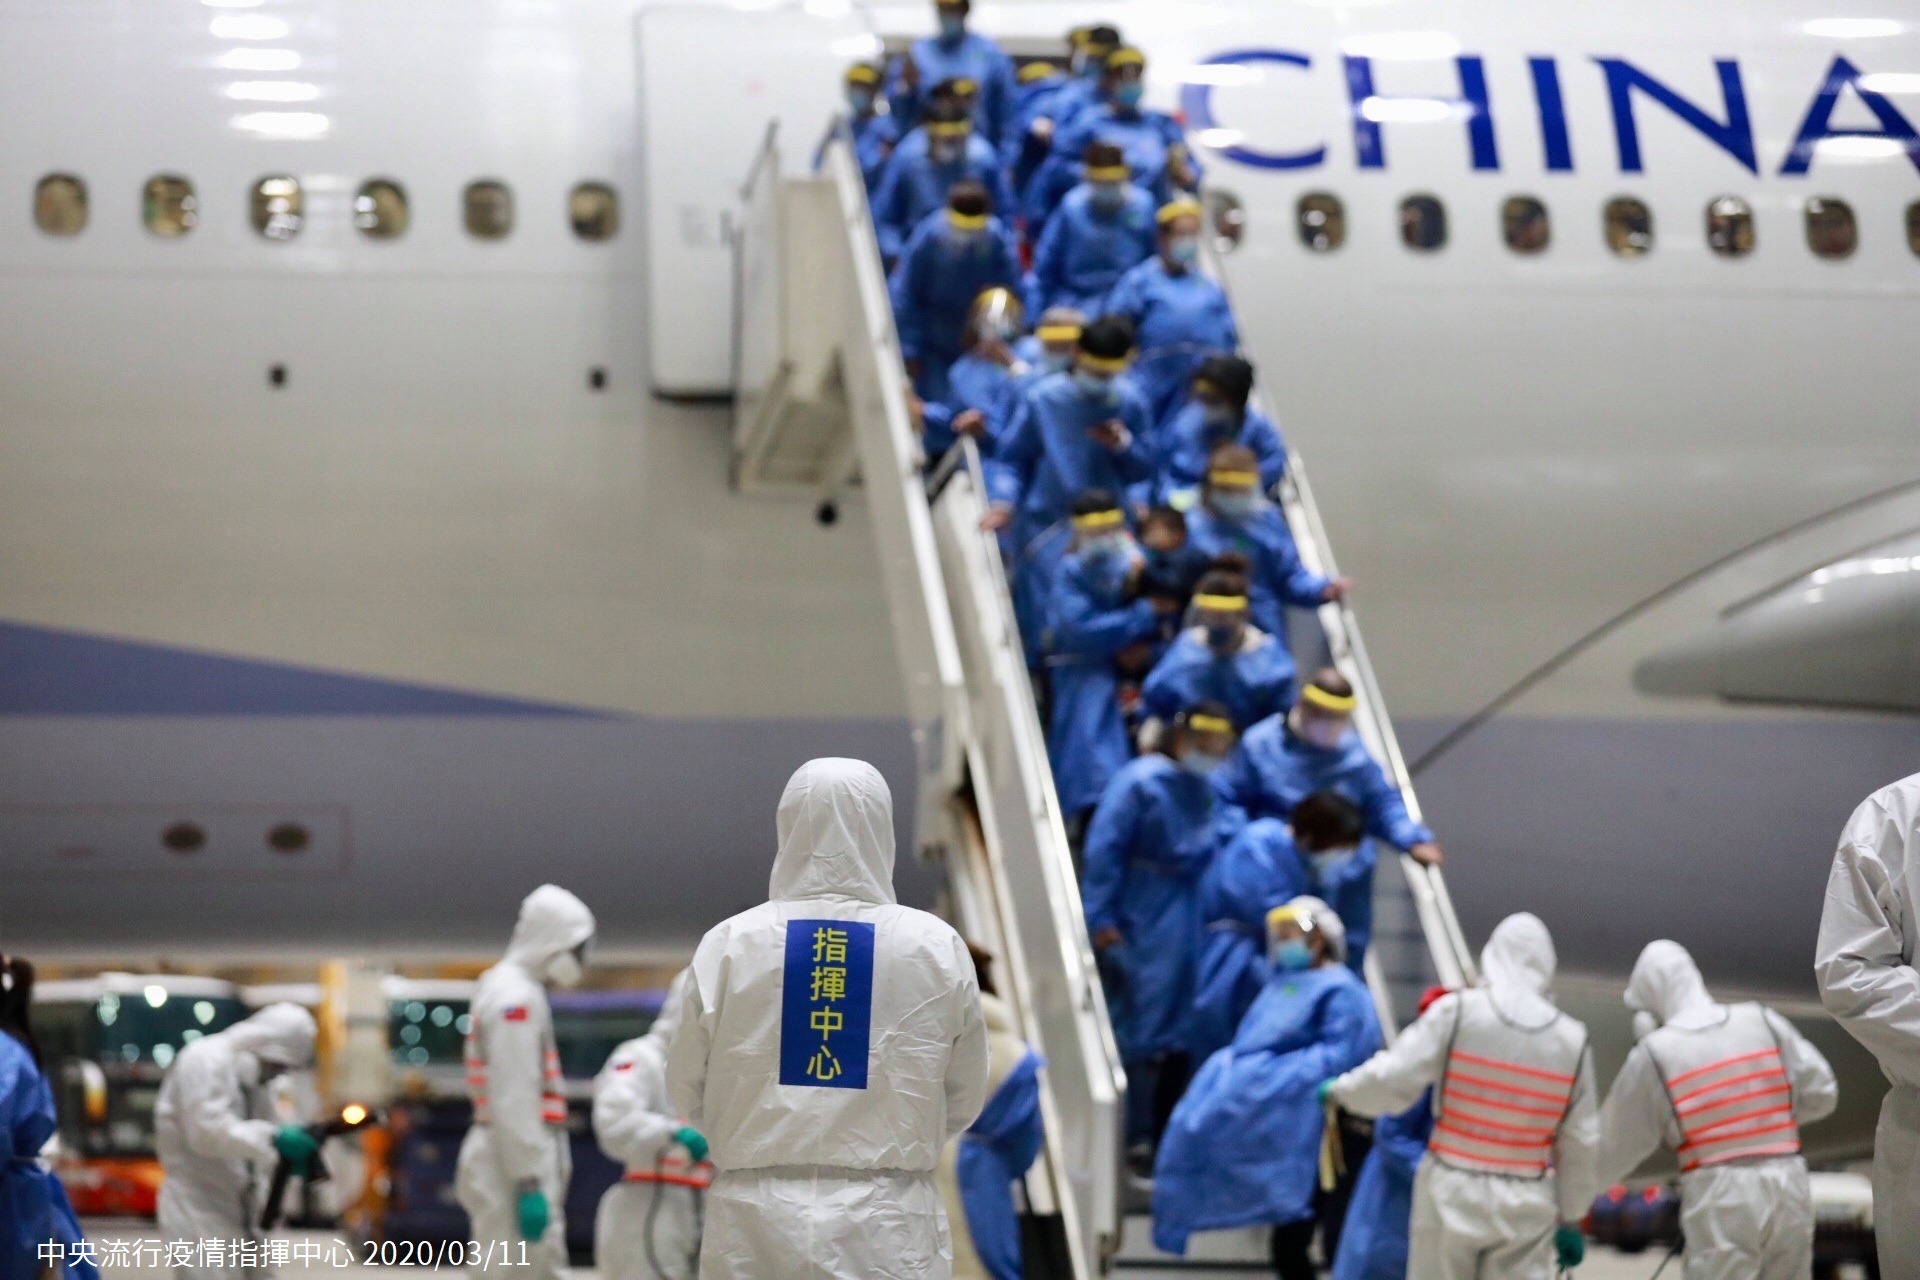 The Taiwanese people on a charter flight arrive at Taiwan Taoyuan International Airport.